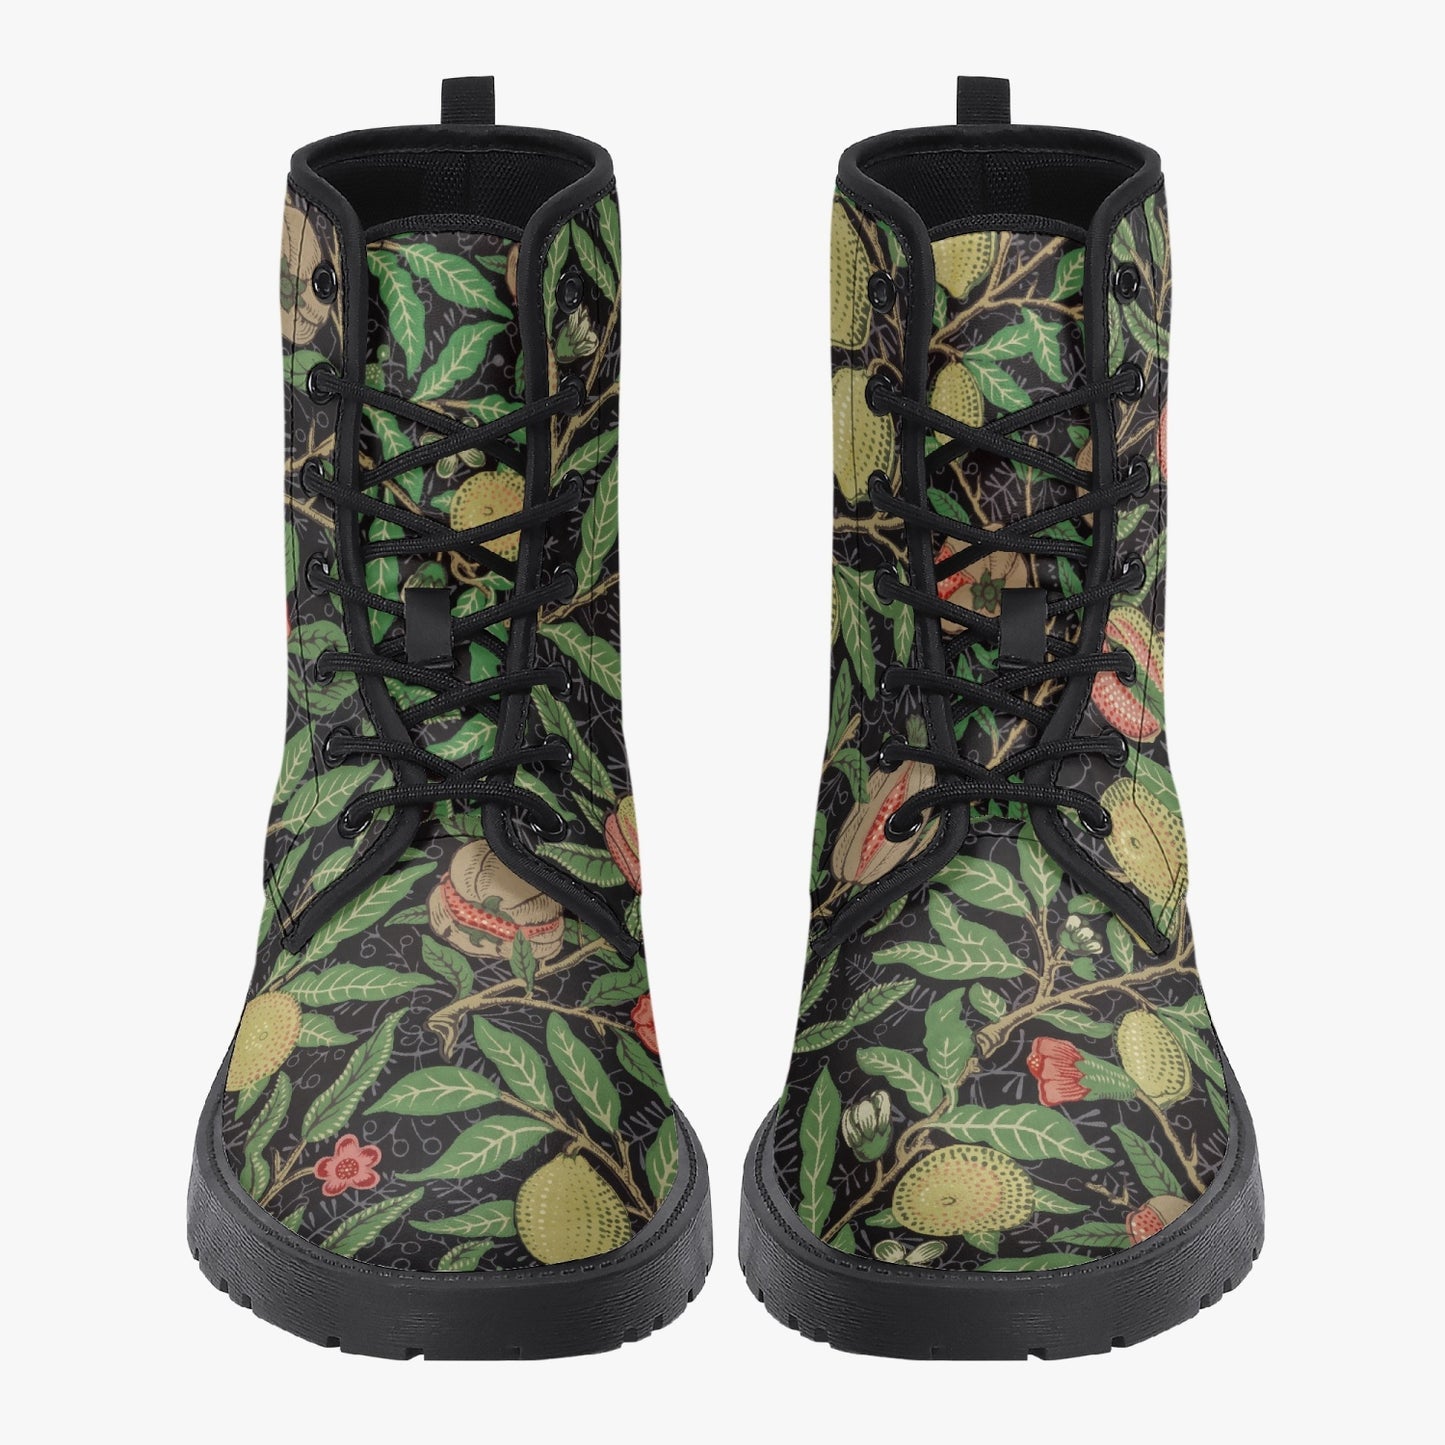 Flowered Boots: Docs Style William Morris Wallpaper Pattern Pomegranate